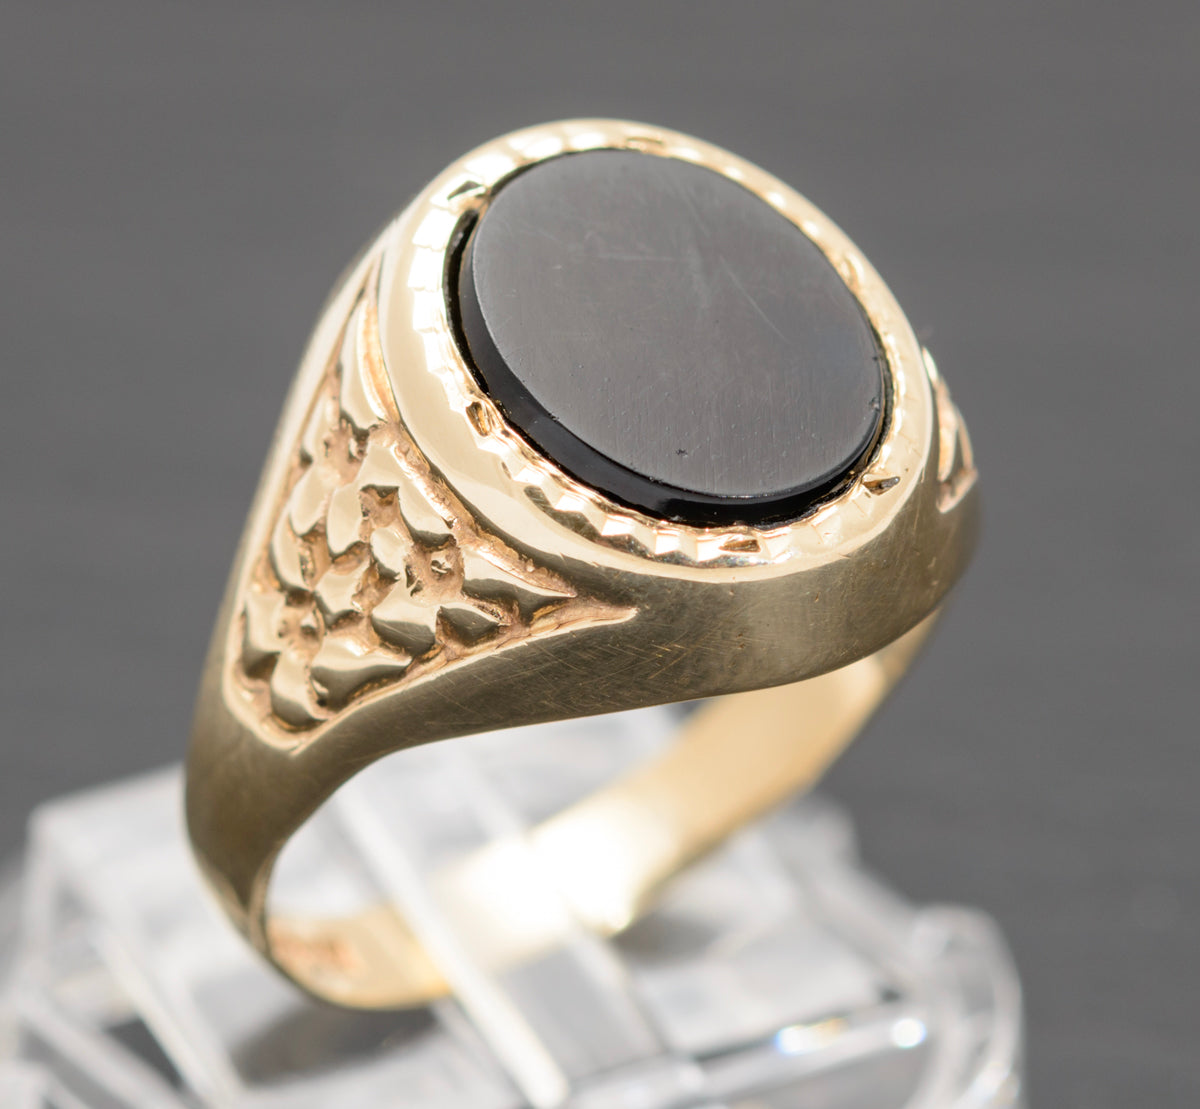 Vintage 9ct Gold & Black Onyx Classic Mens Signet Ring 1970's Jewellery (A1570)